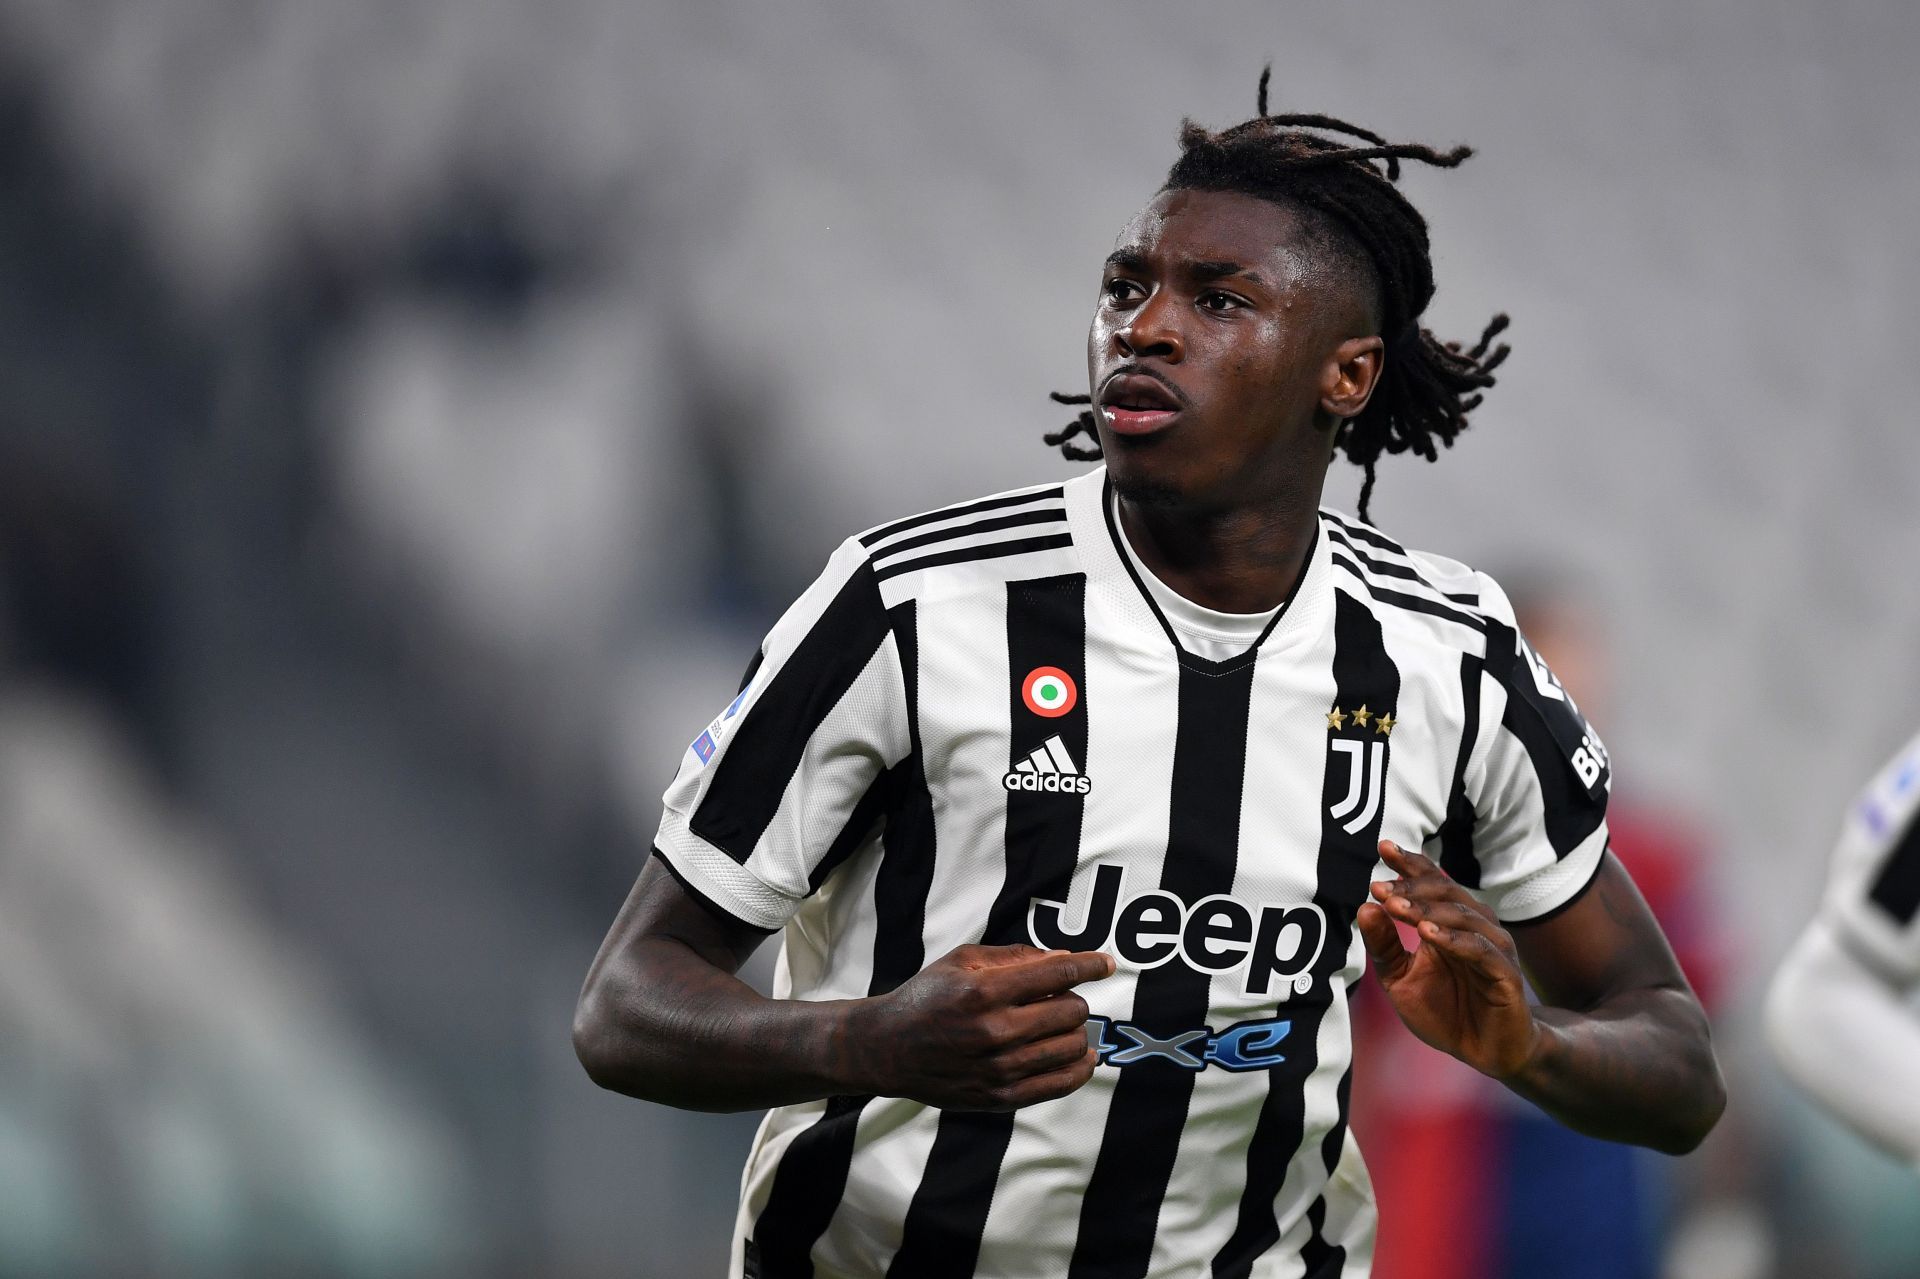 Kean has another chance to impress